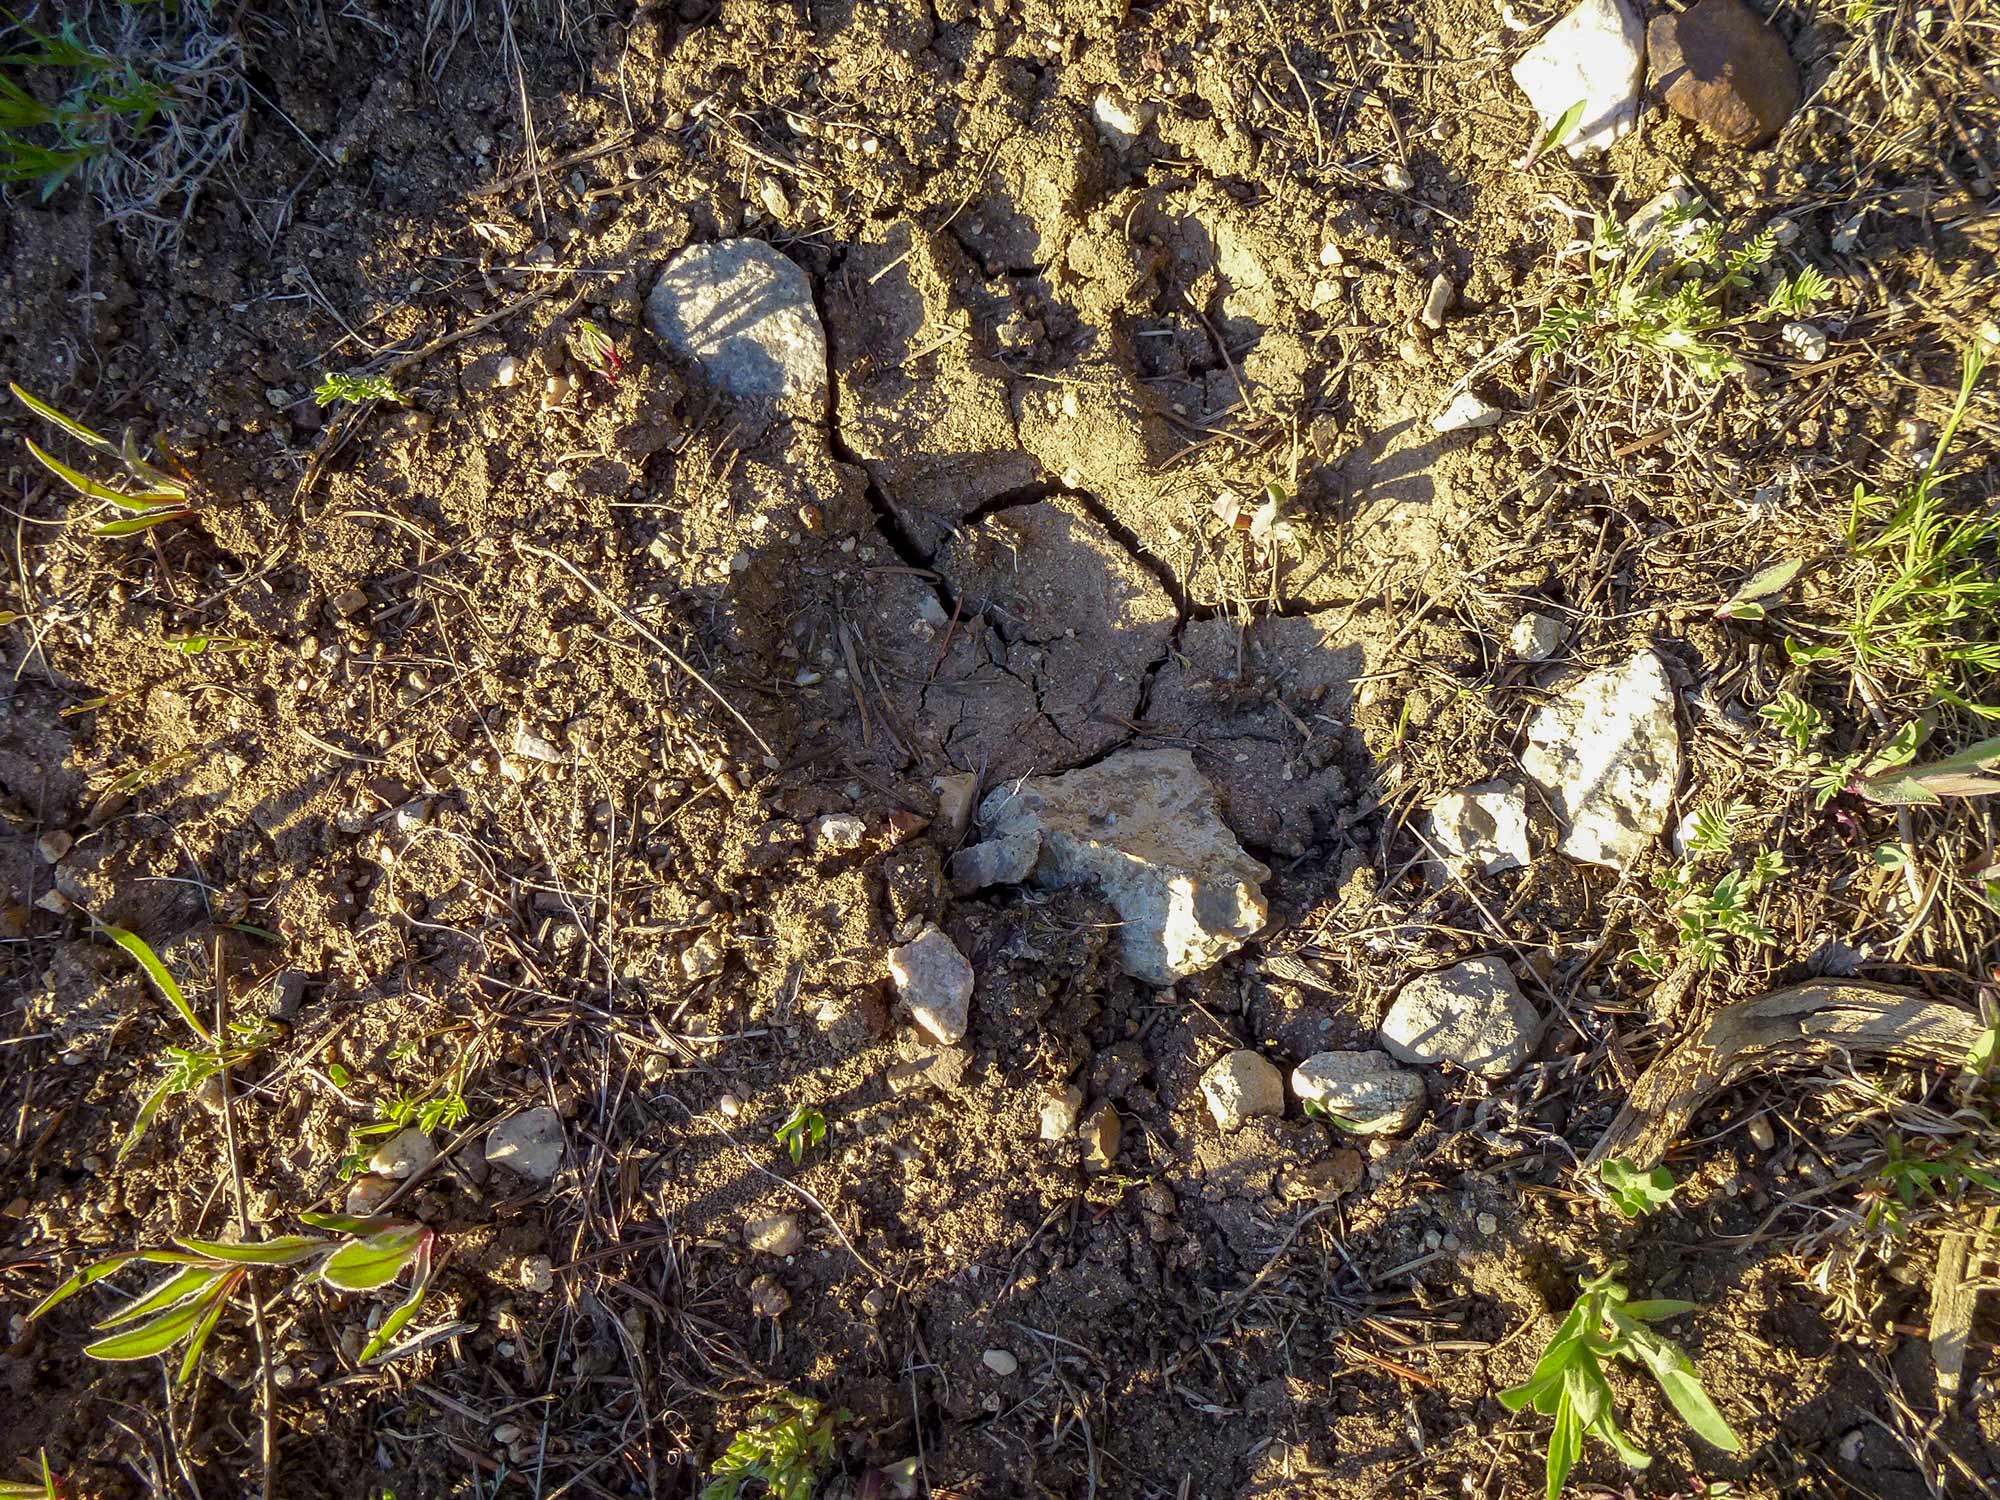 spring bear track in the mud.